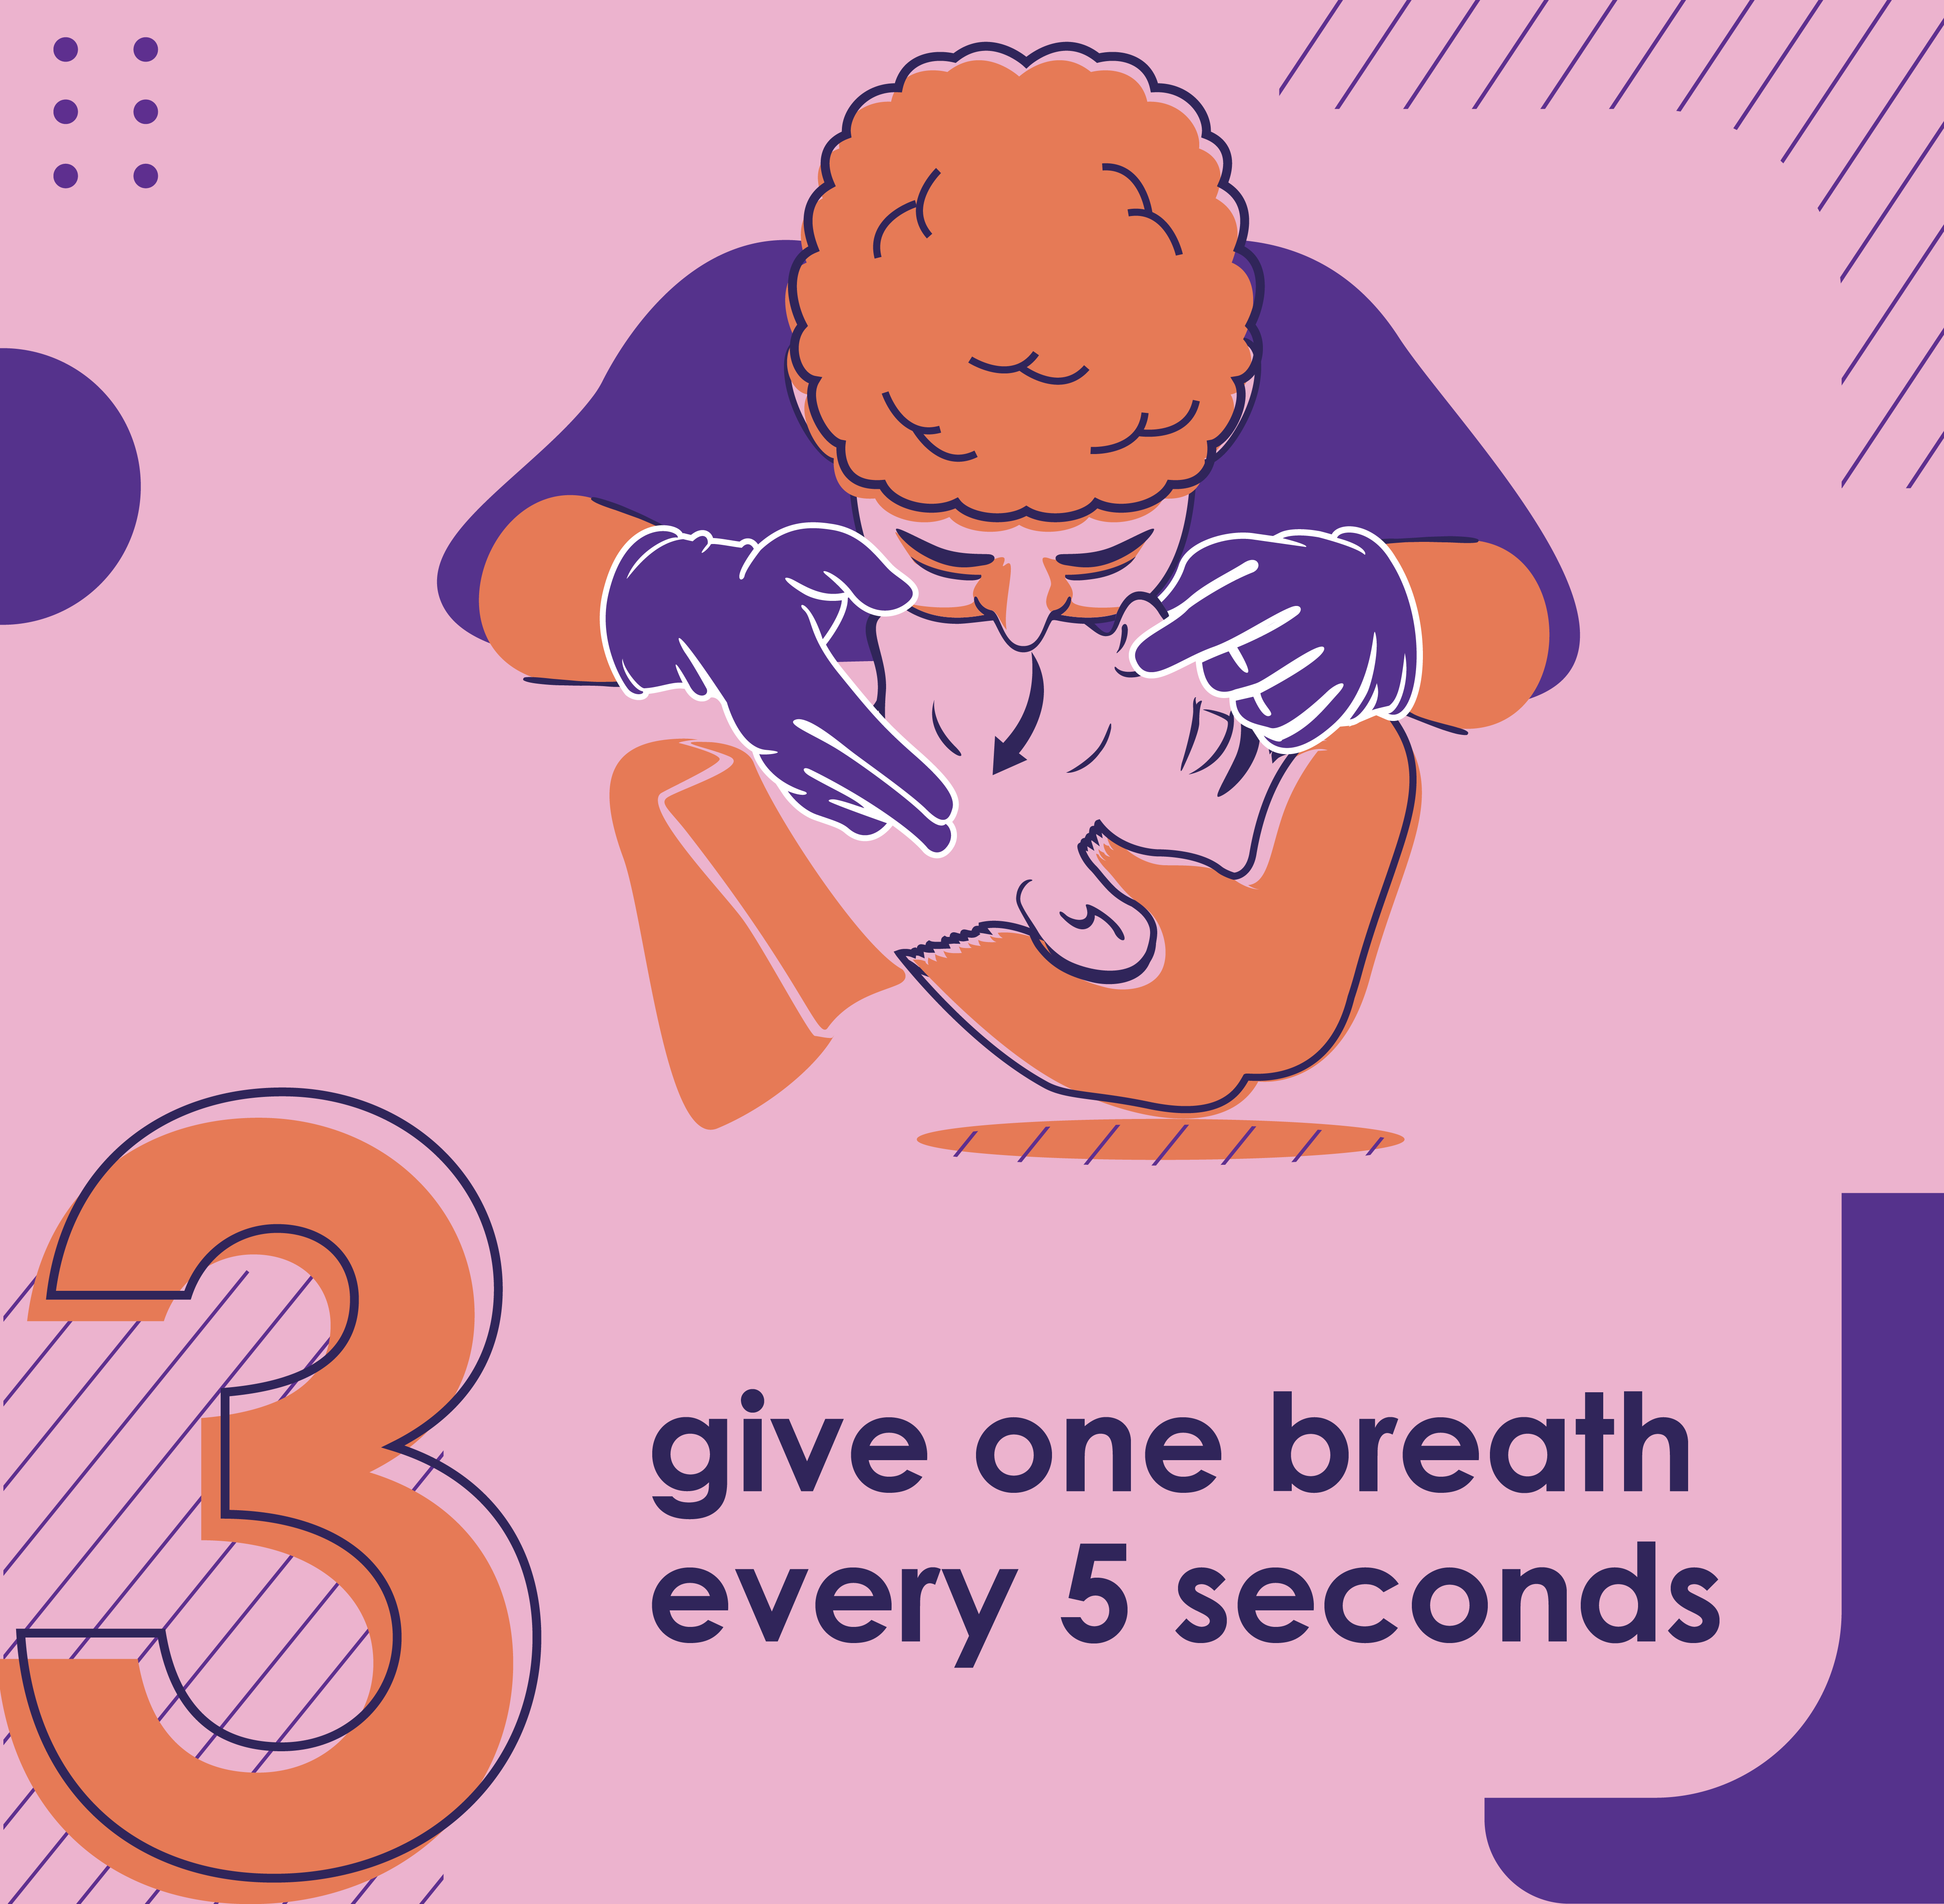 give one breath every 5 seconds